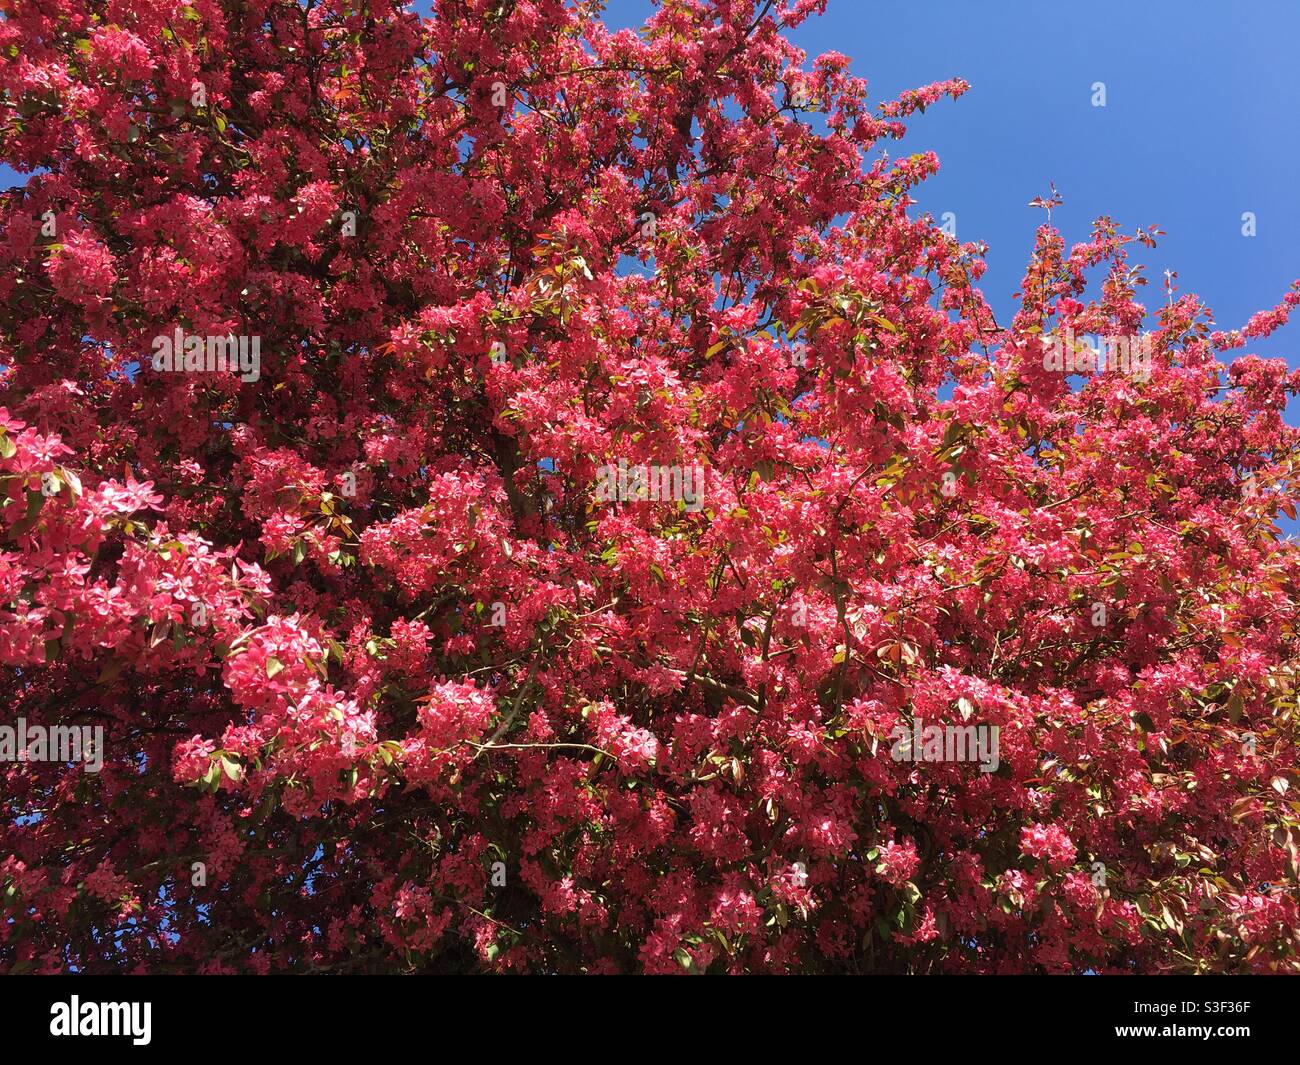 Deep pink blossom tree against clear blue sky Stock Photo